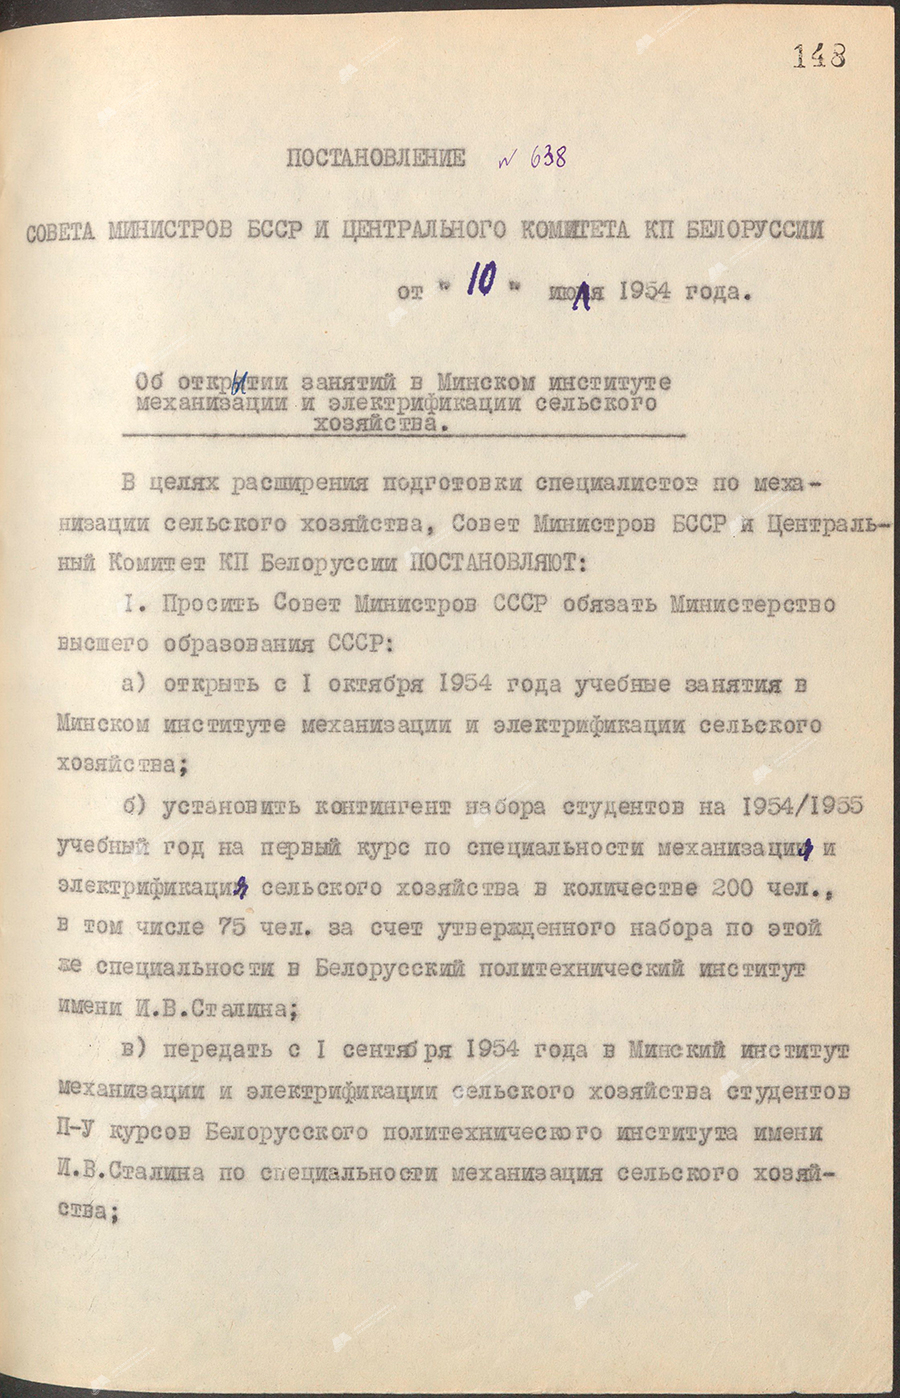 Resolution No. 638 of the Council of Ministers of the Byelorussian SSR and the Central Committee of the Communist Party of Belarus «On the opening of classes at the Minsk Institute of Mechanization and Electrification of Agriculture»-стр. 0